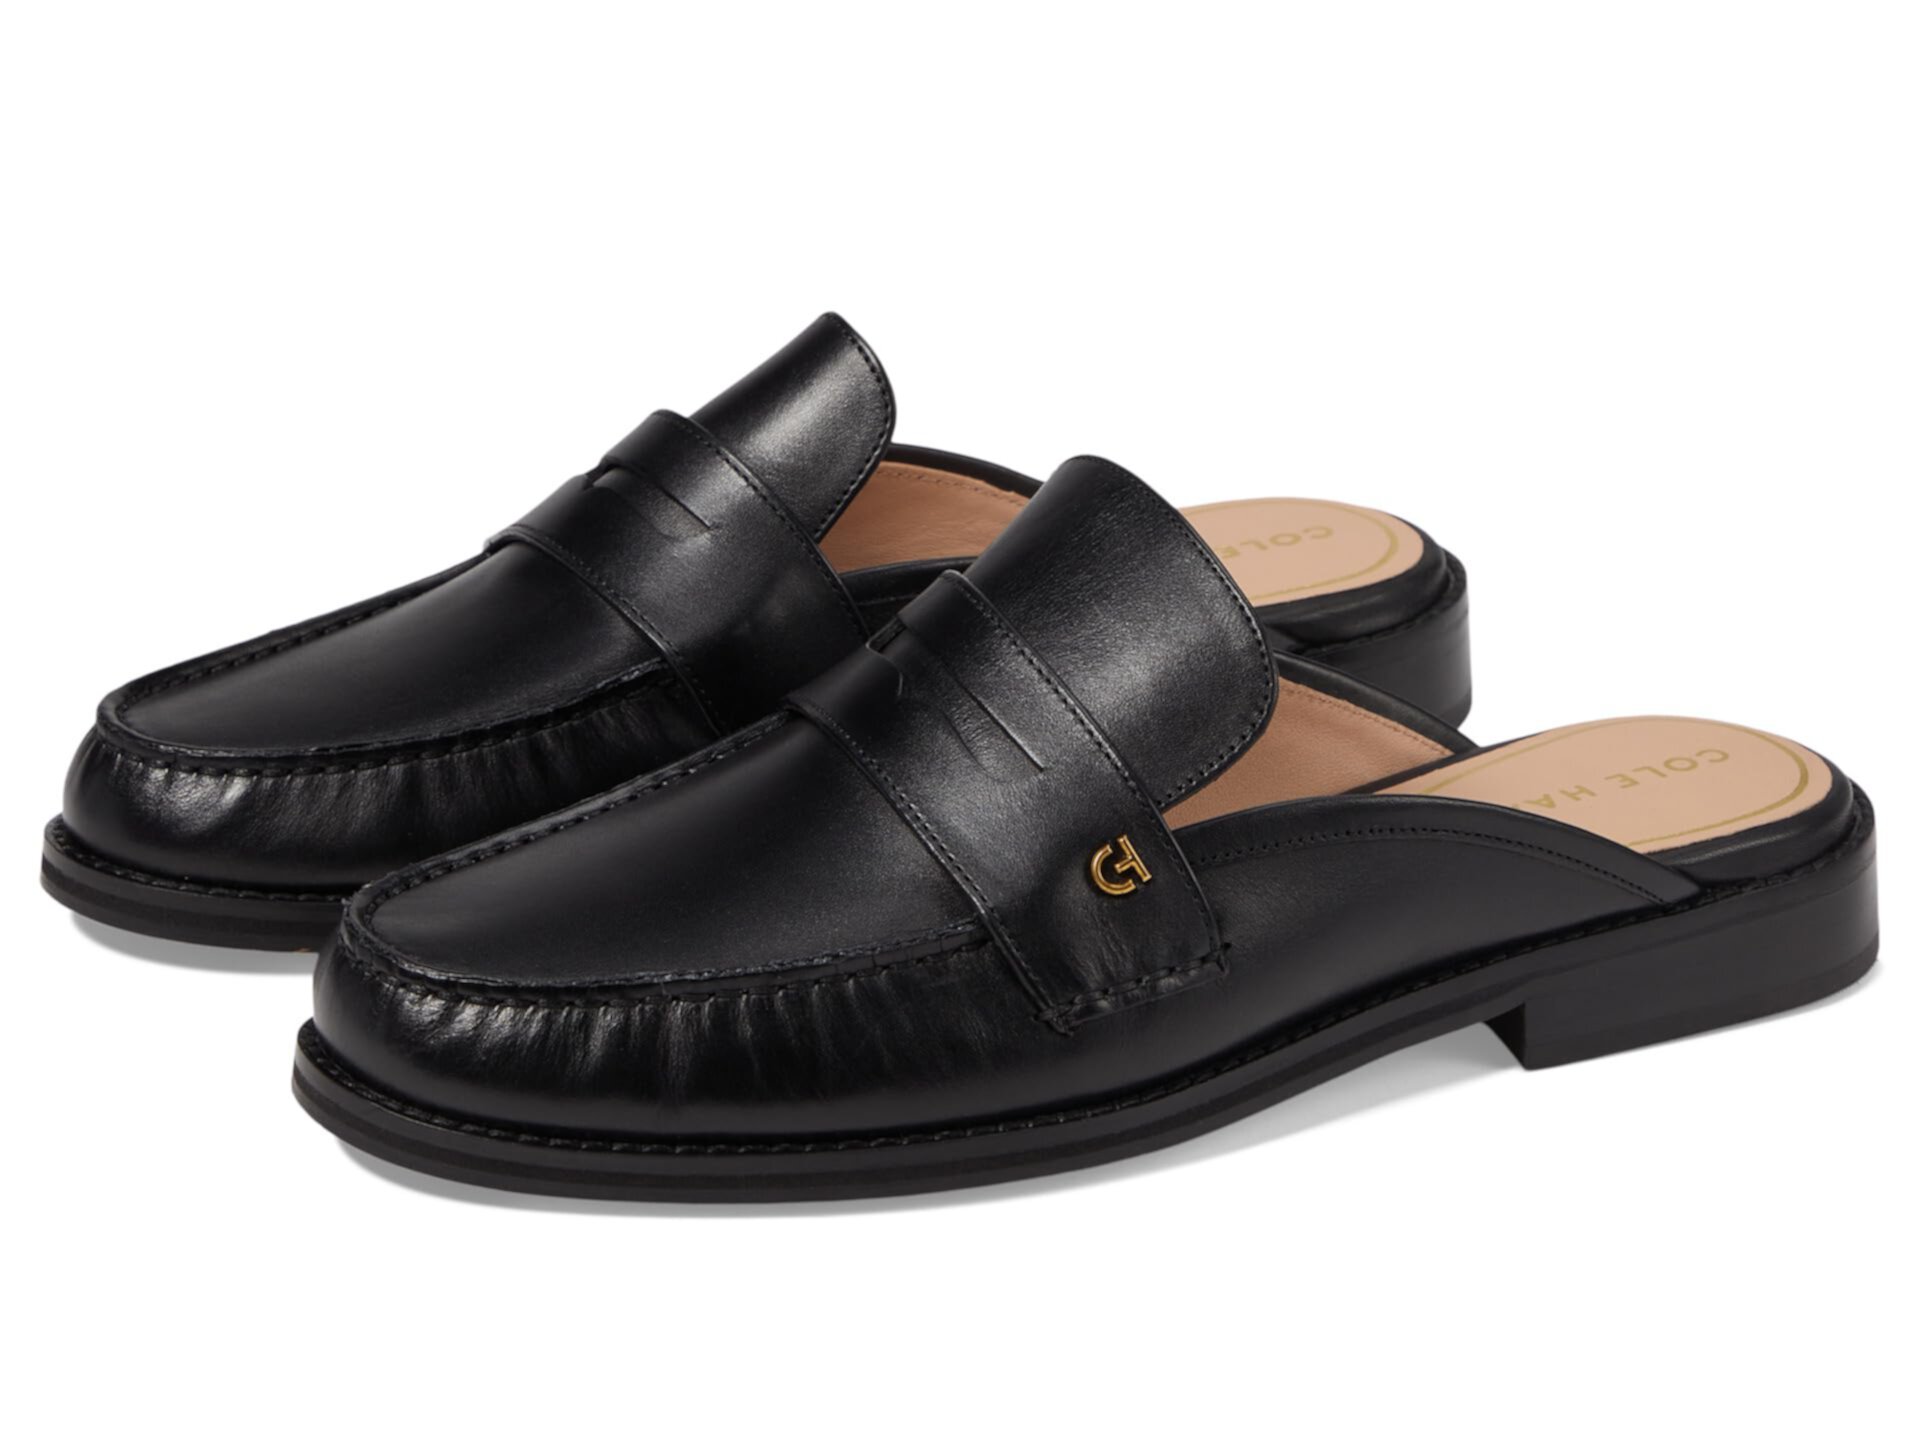 Мюли Lux Pinch Penny Cole Haan